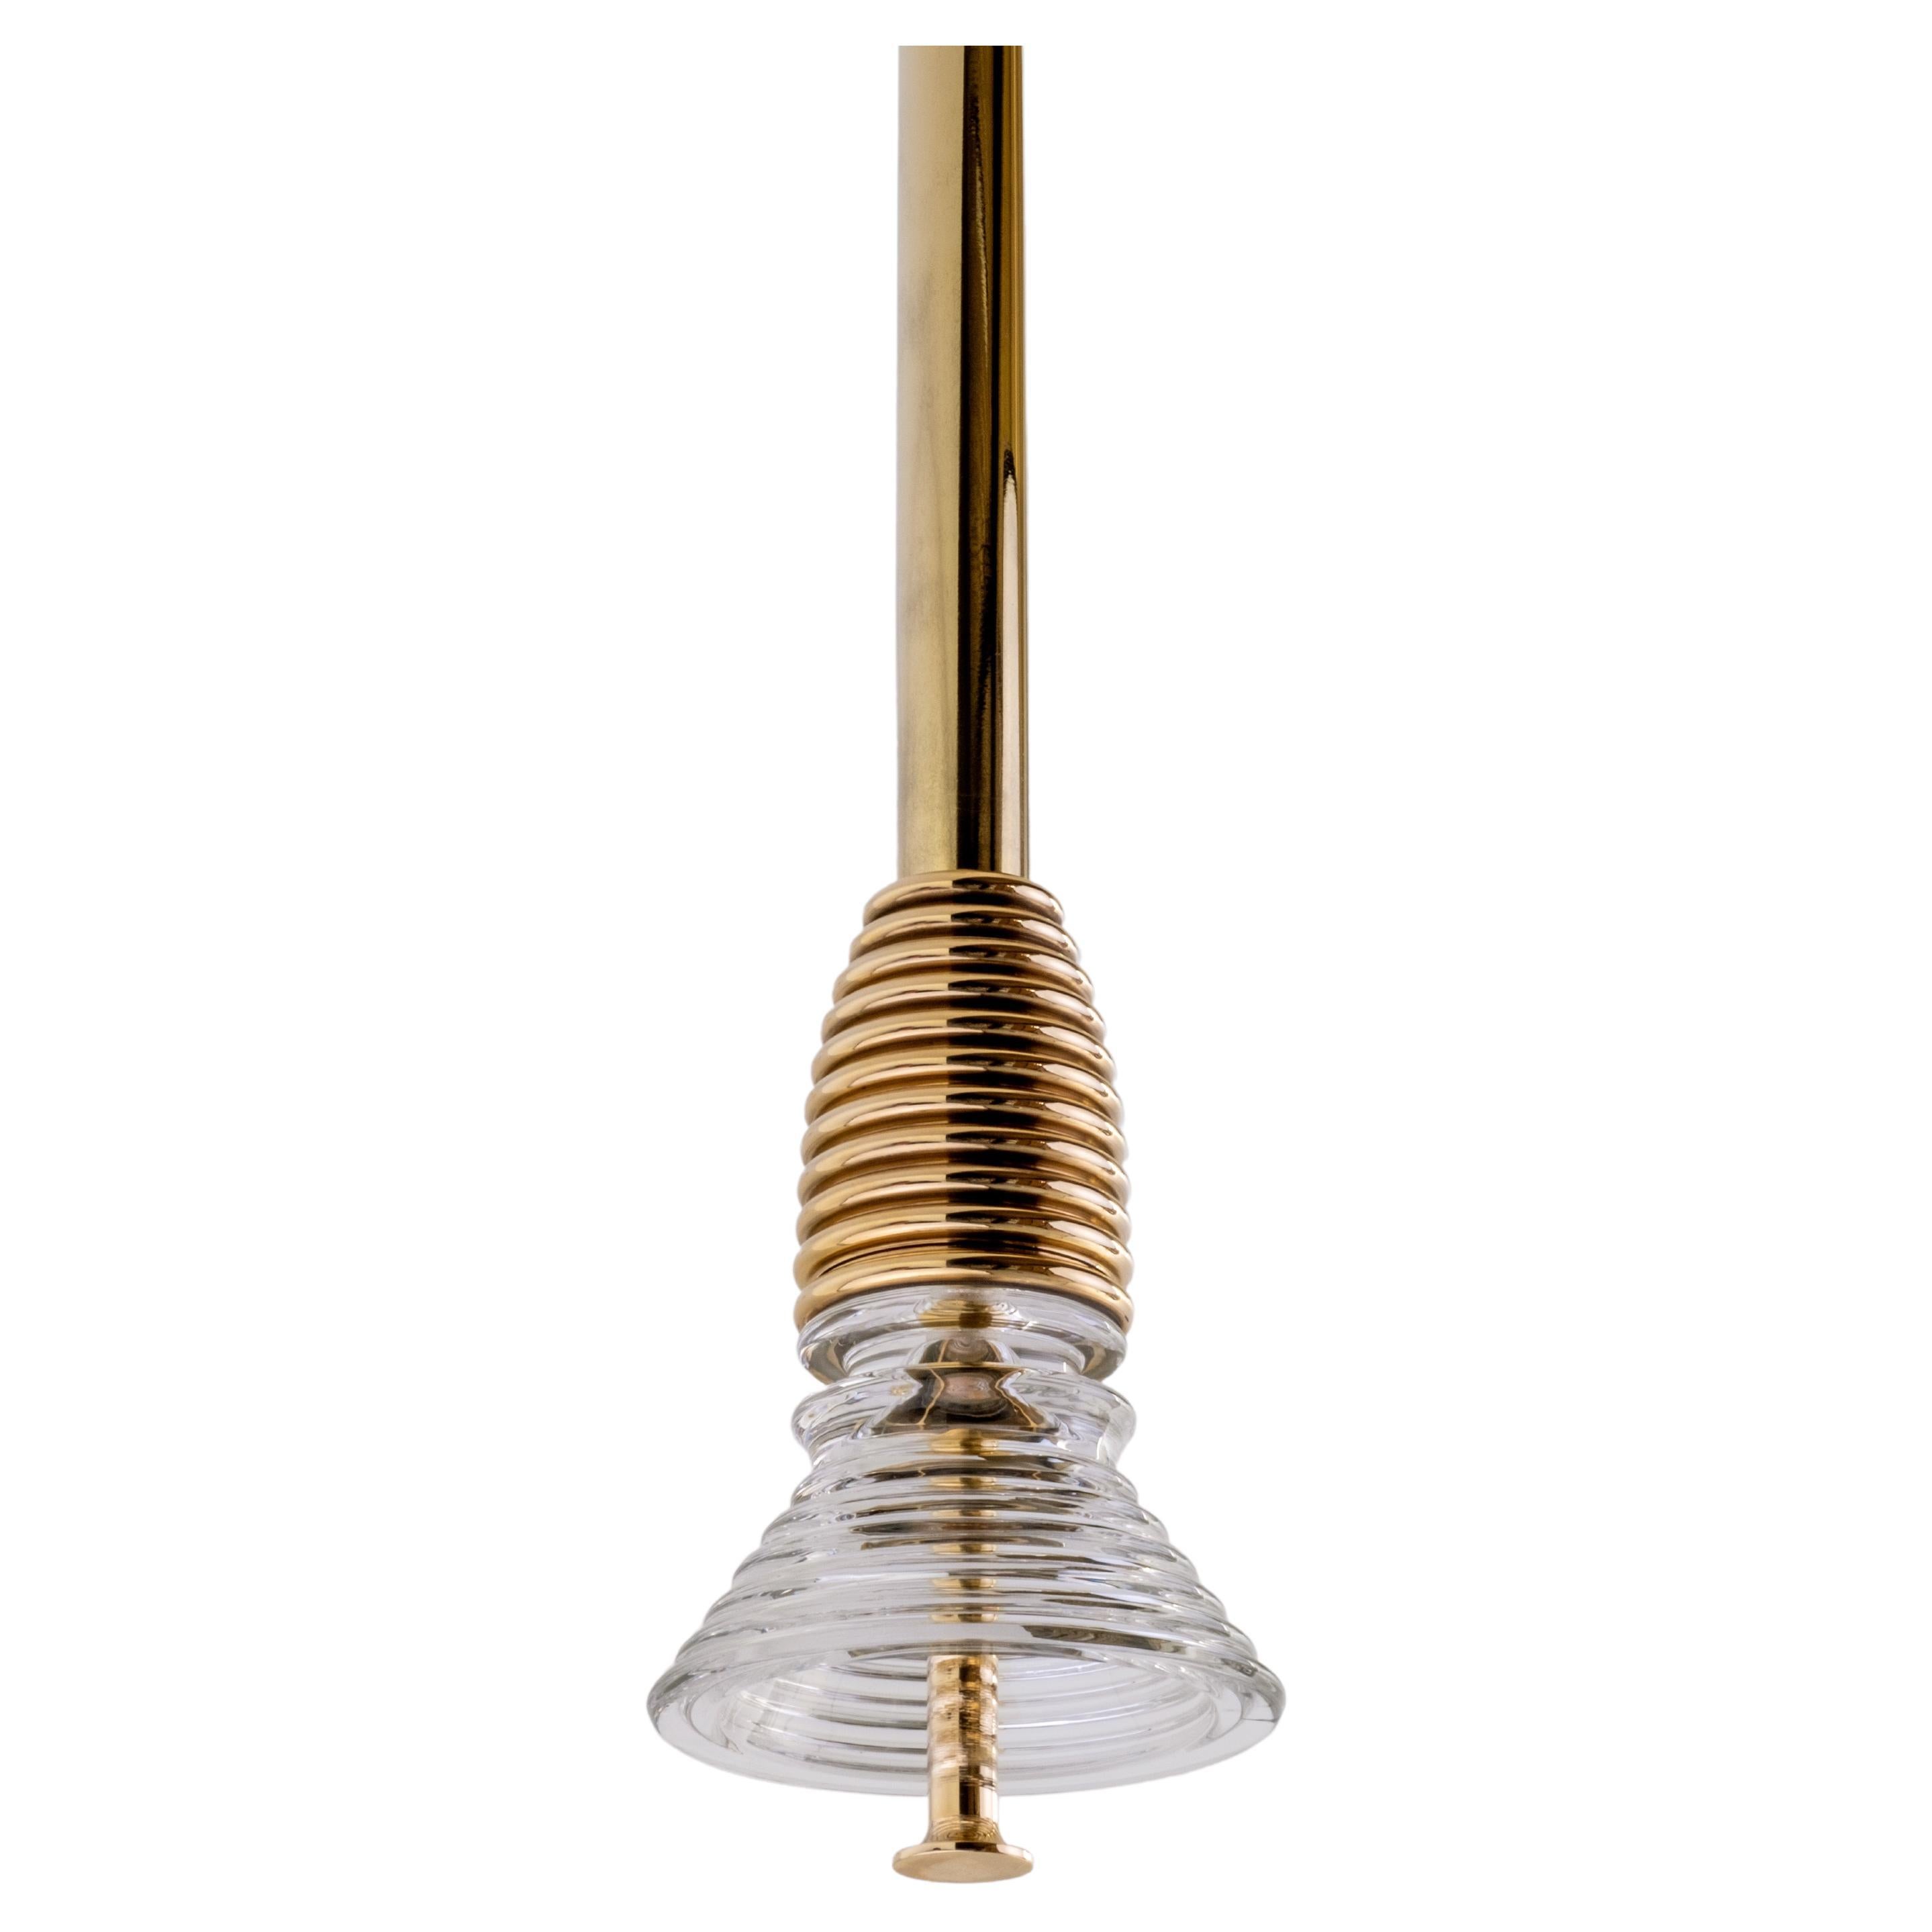 The Insulator 'A' Pendant in polished brass and clear glass by NOVOCASTRIAN deco For Sale